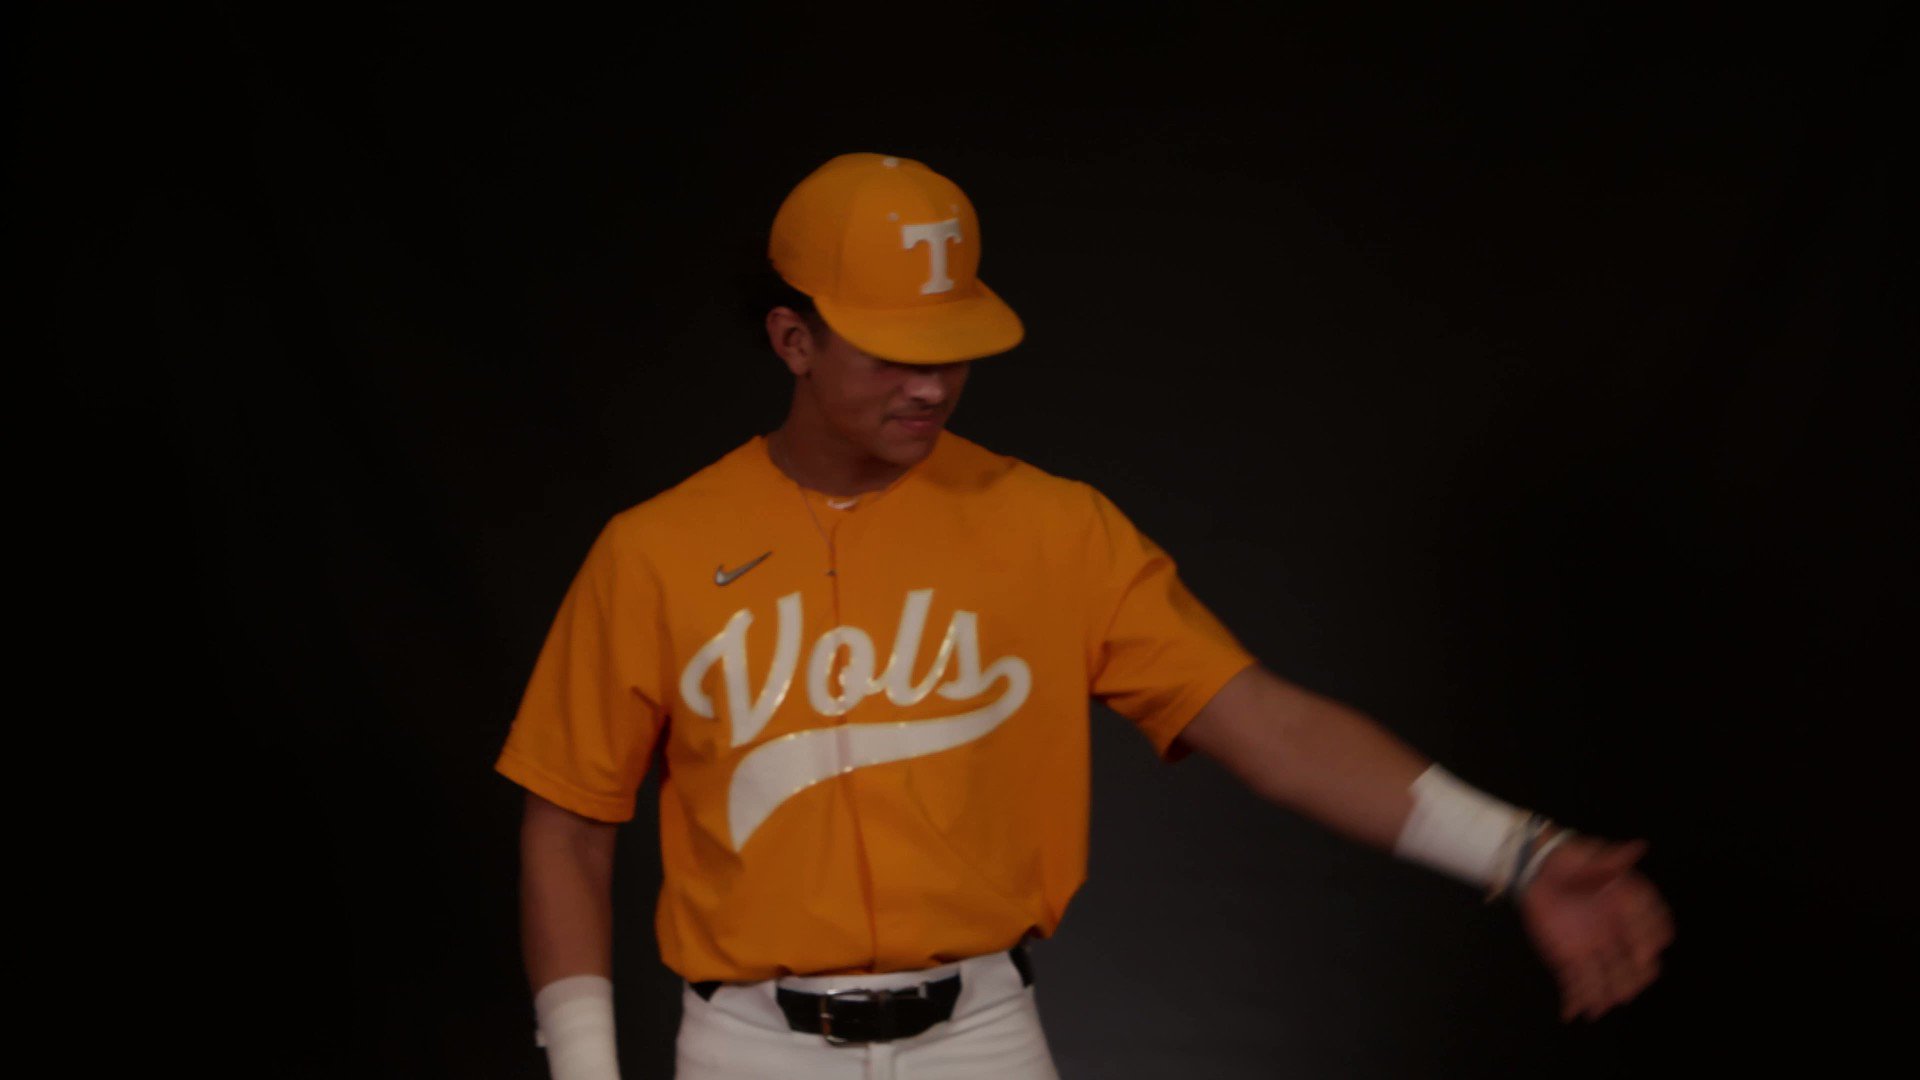 Tennessee Baseball on Twitter: ThEY oLnY HiT HoMErs cUz thEY pLay